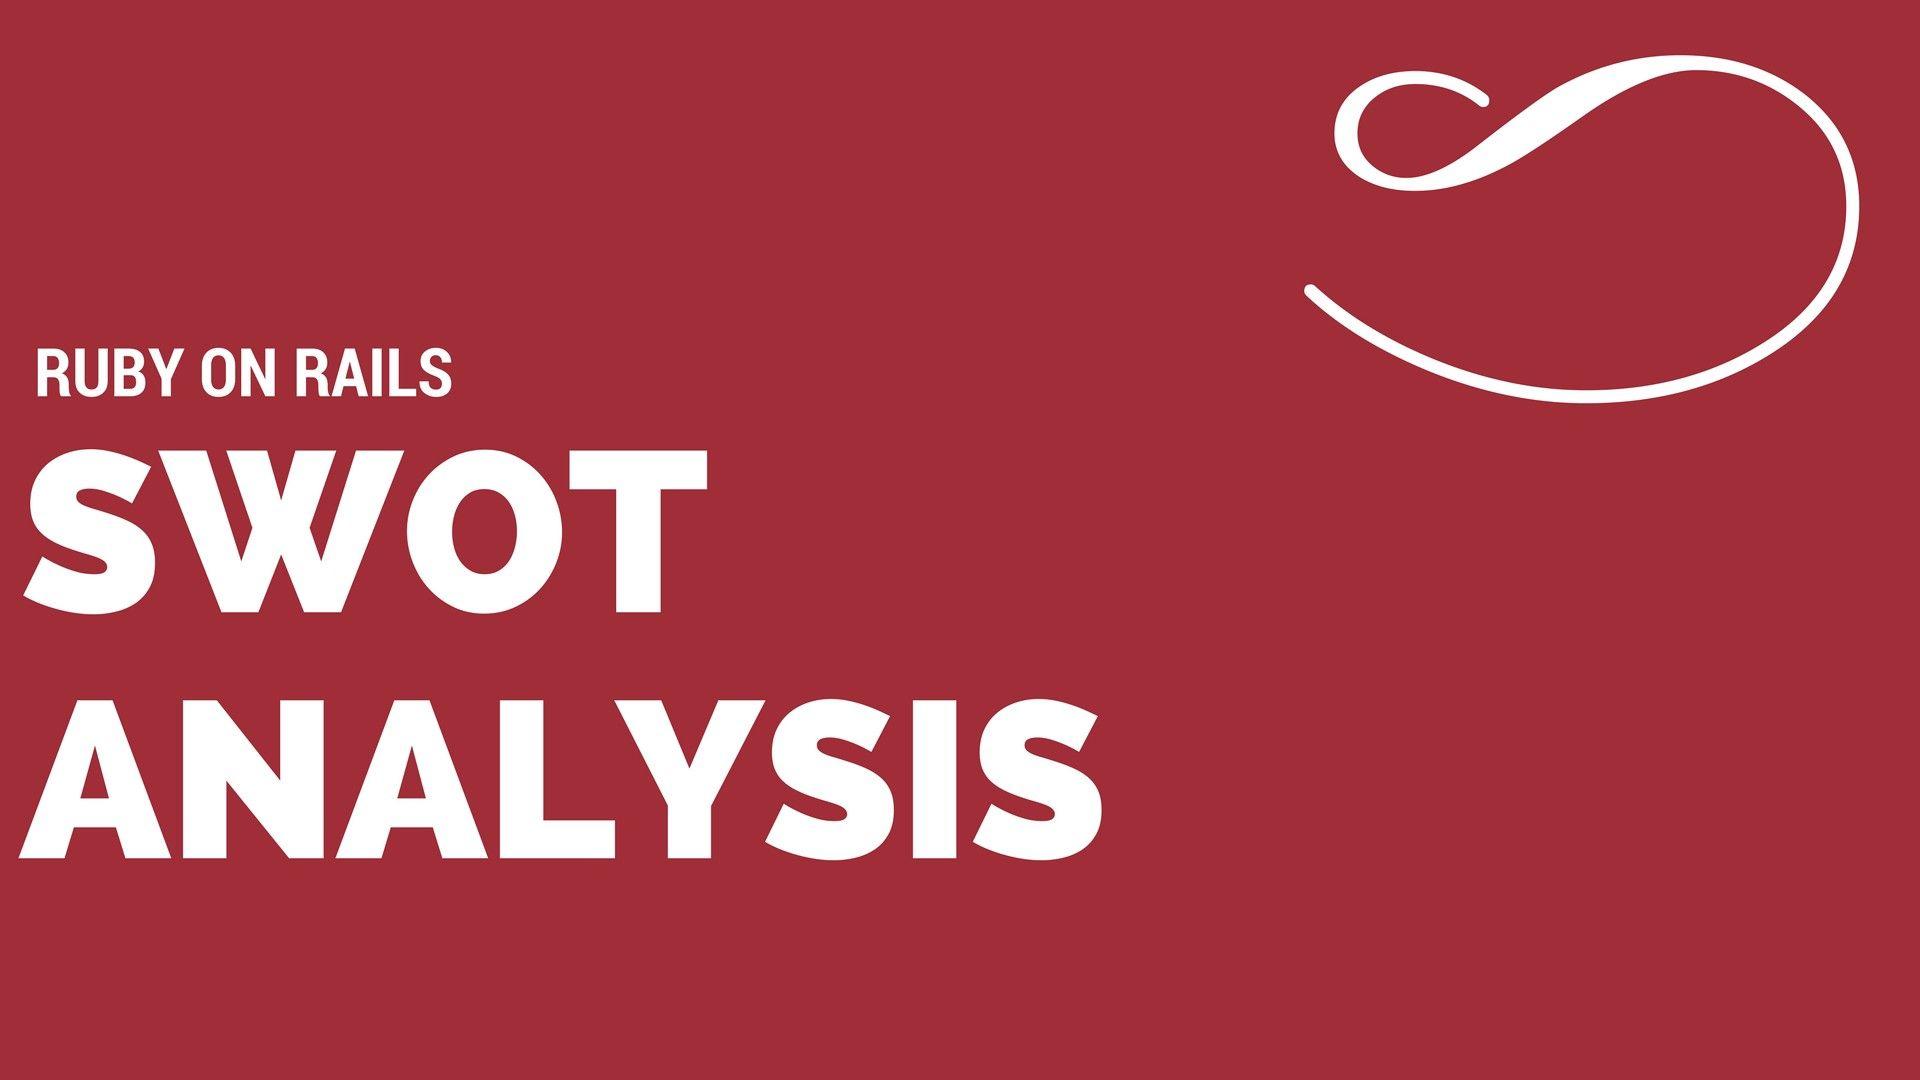 SWOT analysis of Ruby on Rails